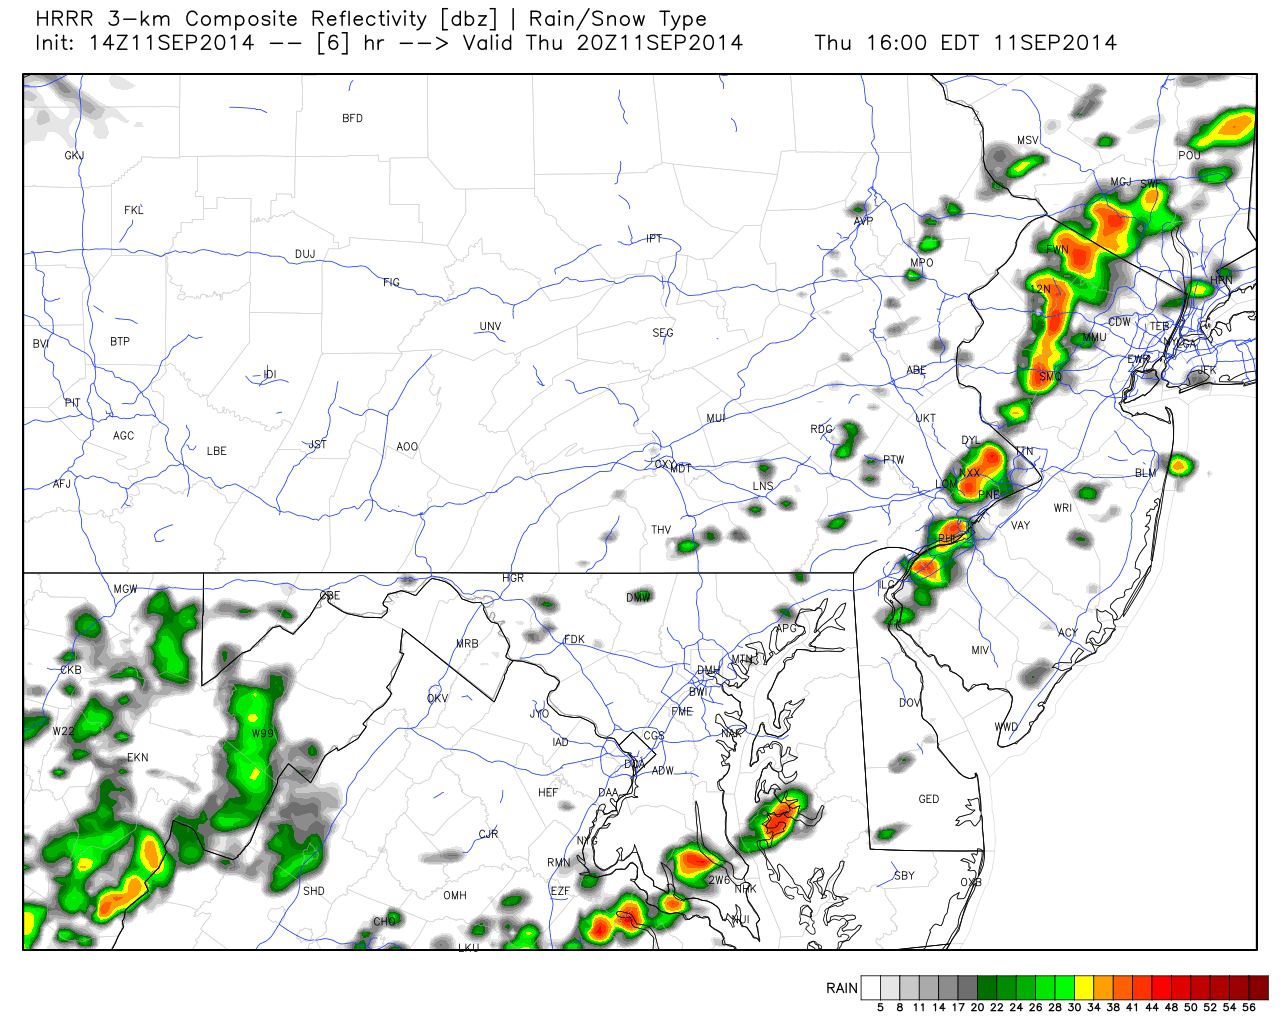 14Z HRRR shows showers and thunderstorms approaching the new jersey area